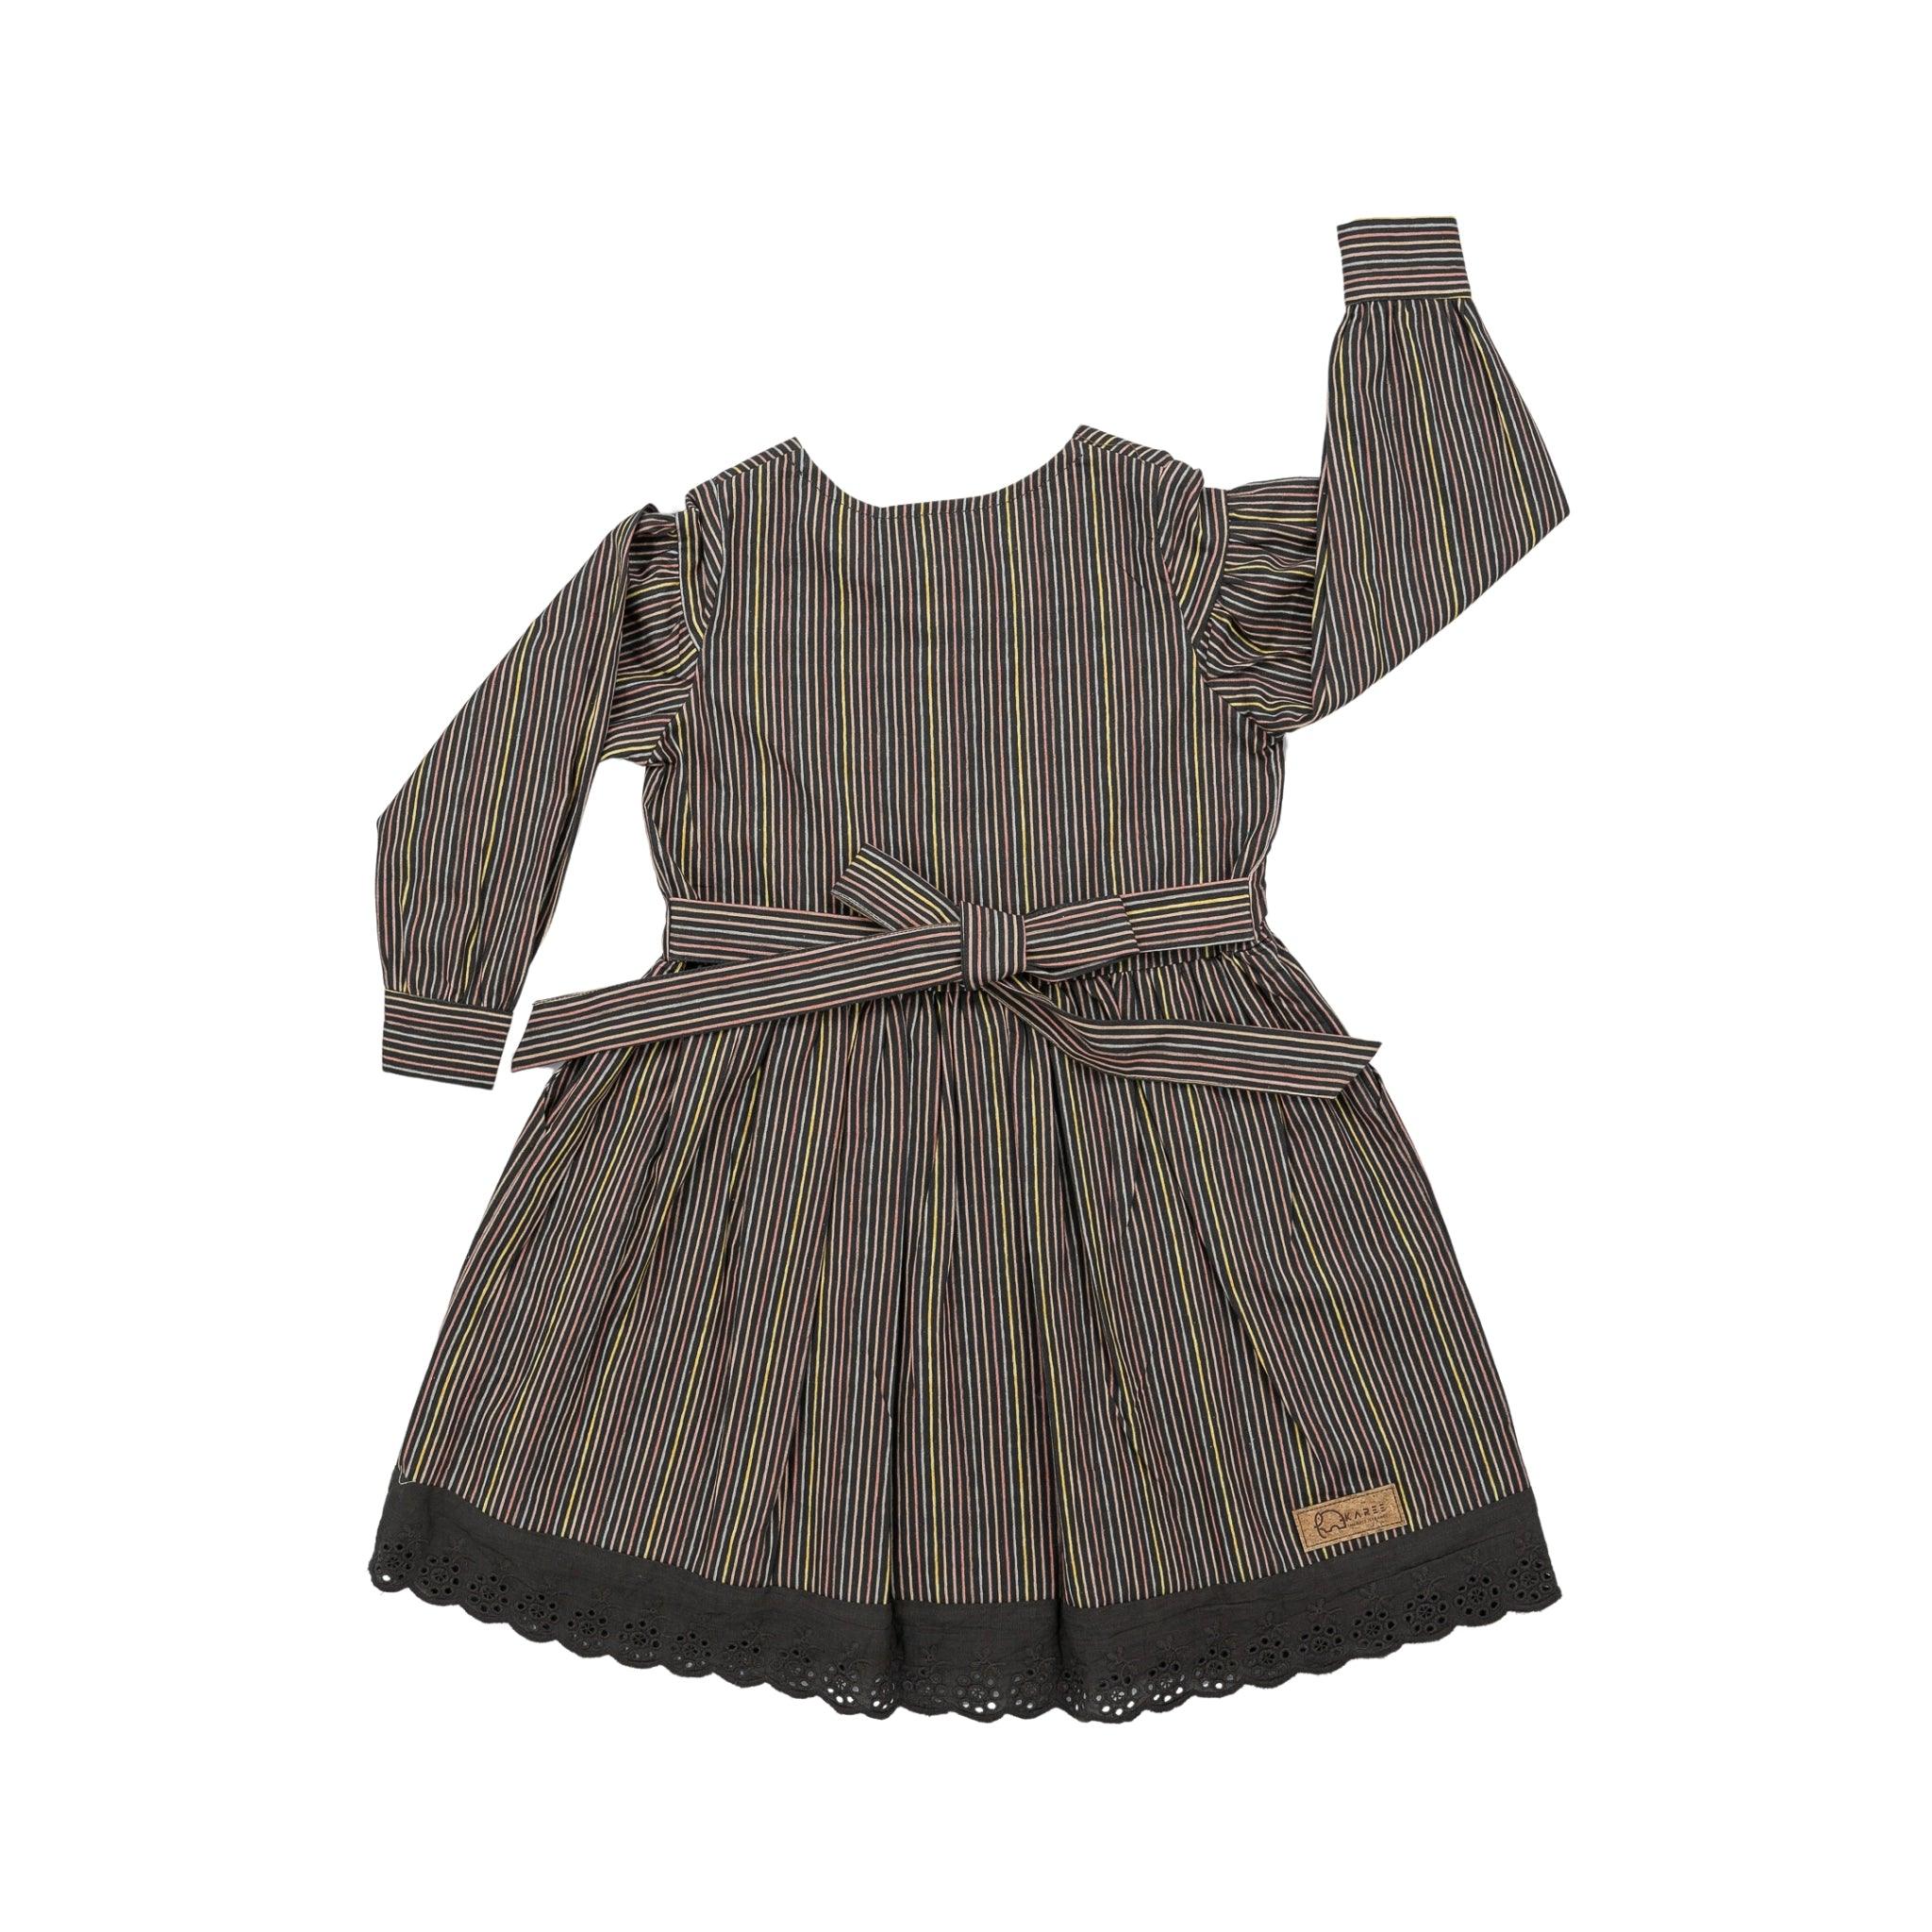 Black Striped Karee children's dress with long sleeves and a lace hem, displayed flat against a white background.